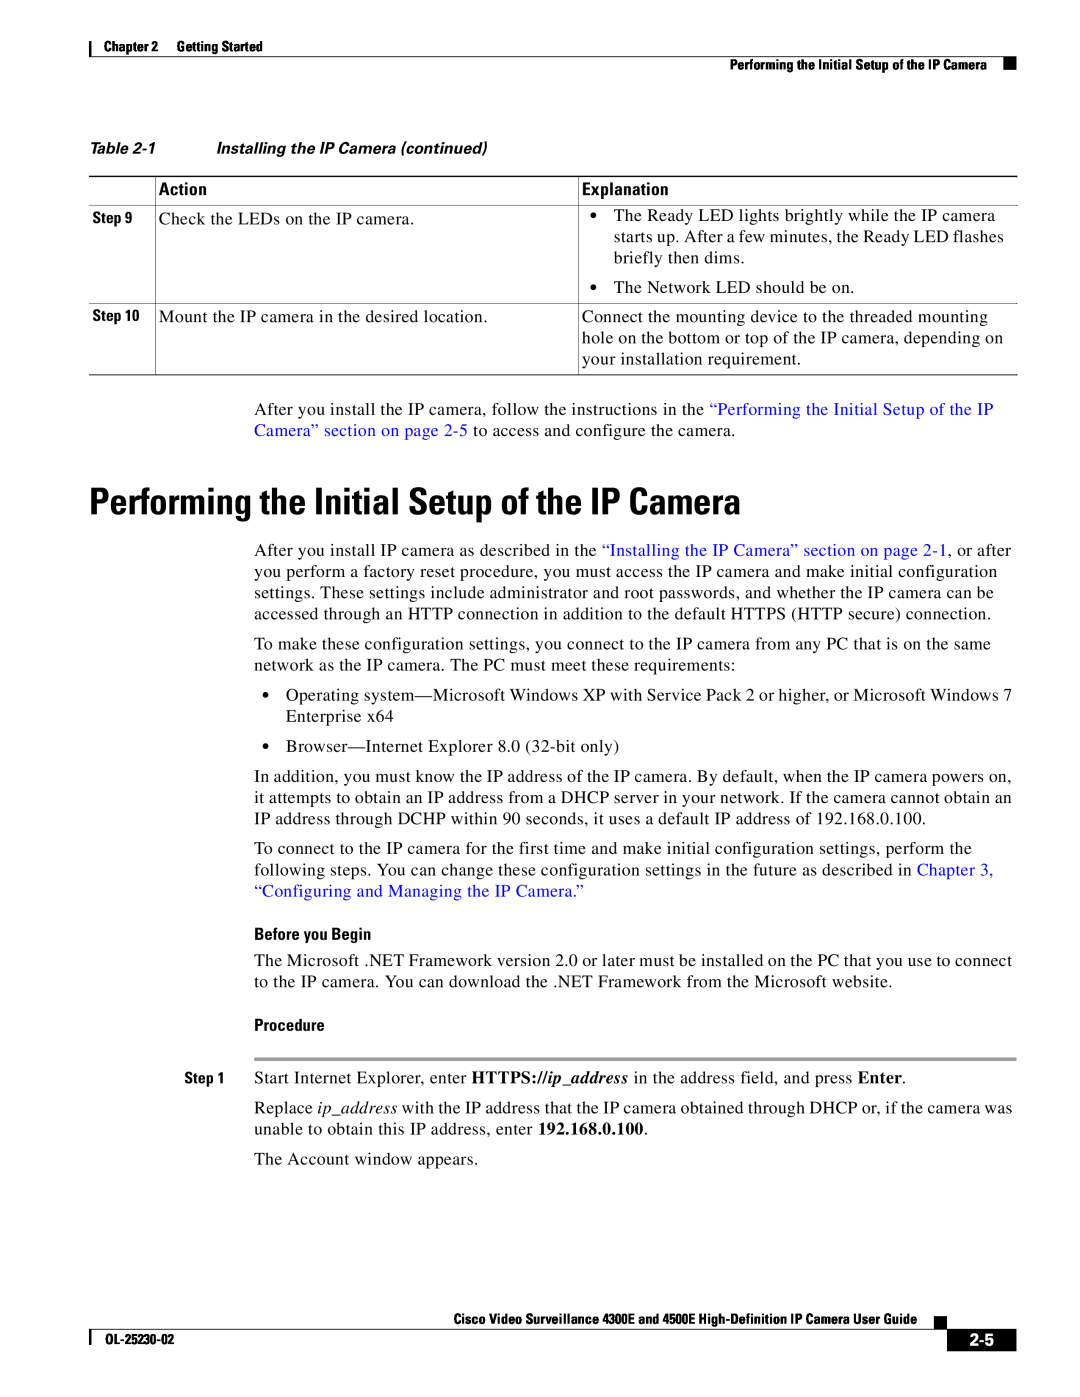 Cisco Systems 4300E manual Performing the Initial Setup of the IP Camera, Action, Explanation, Before you Begin, Procedure 